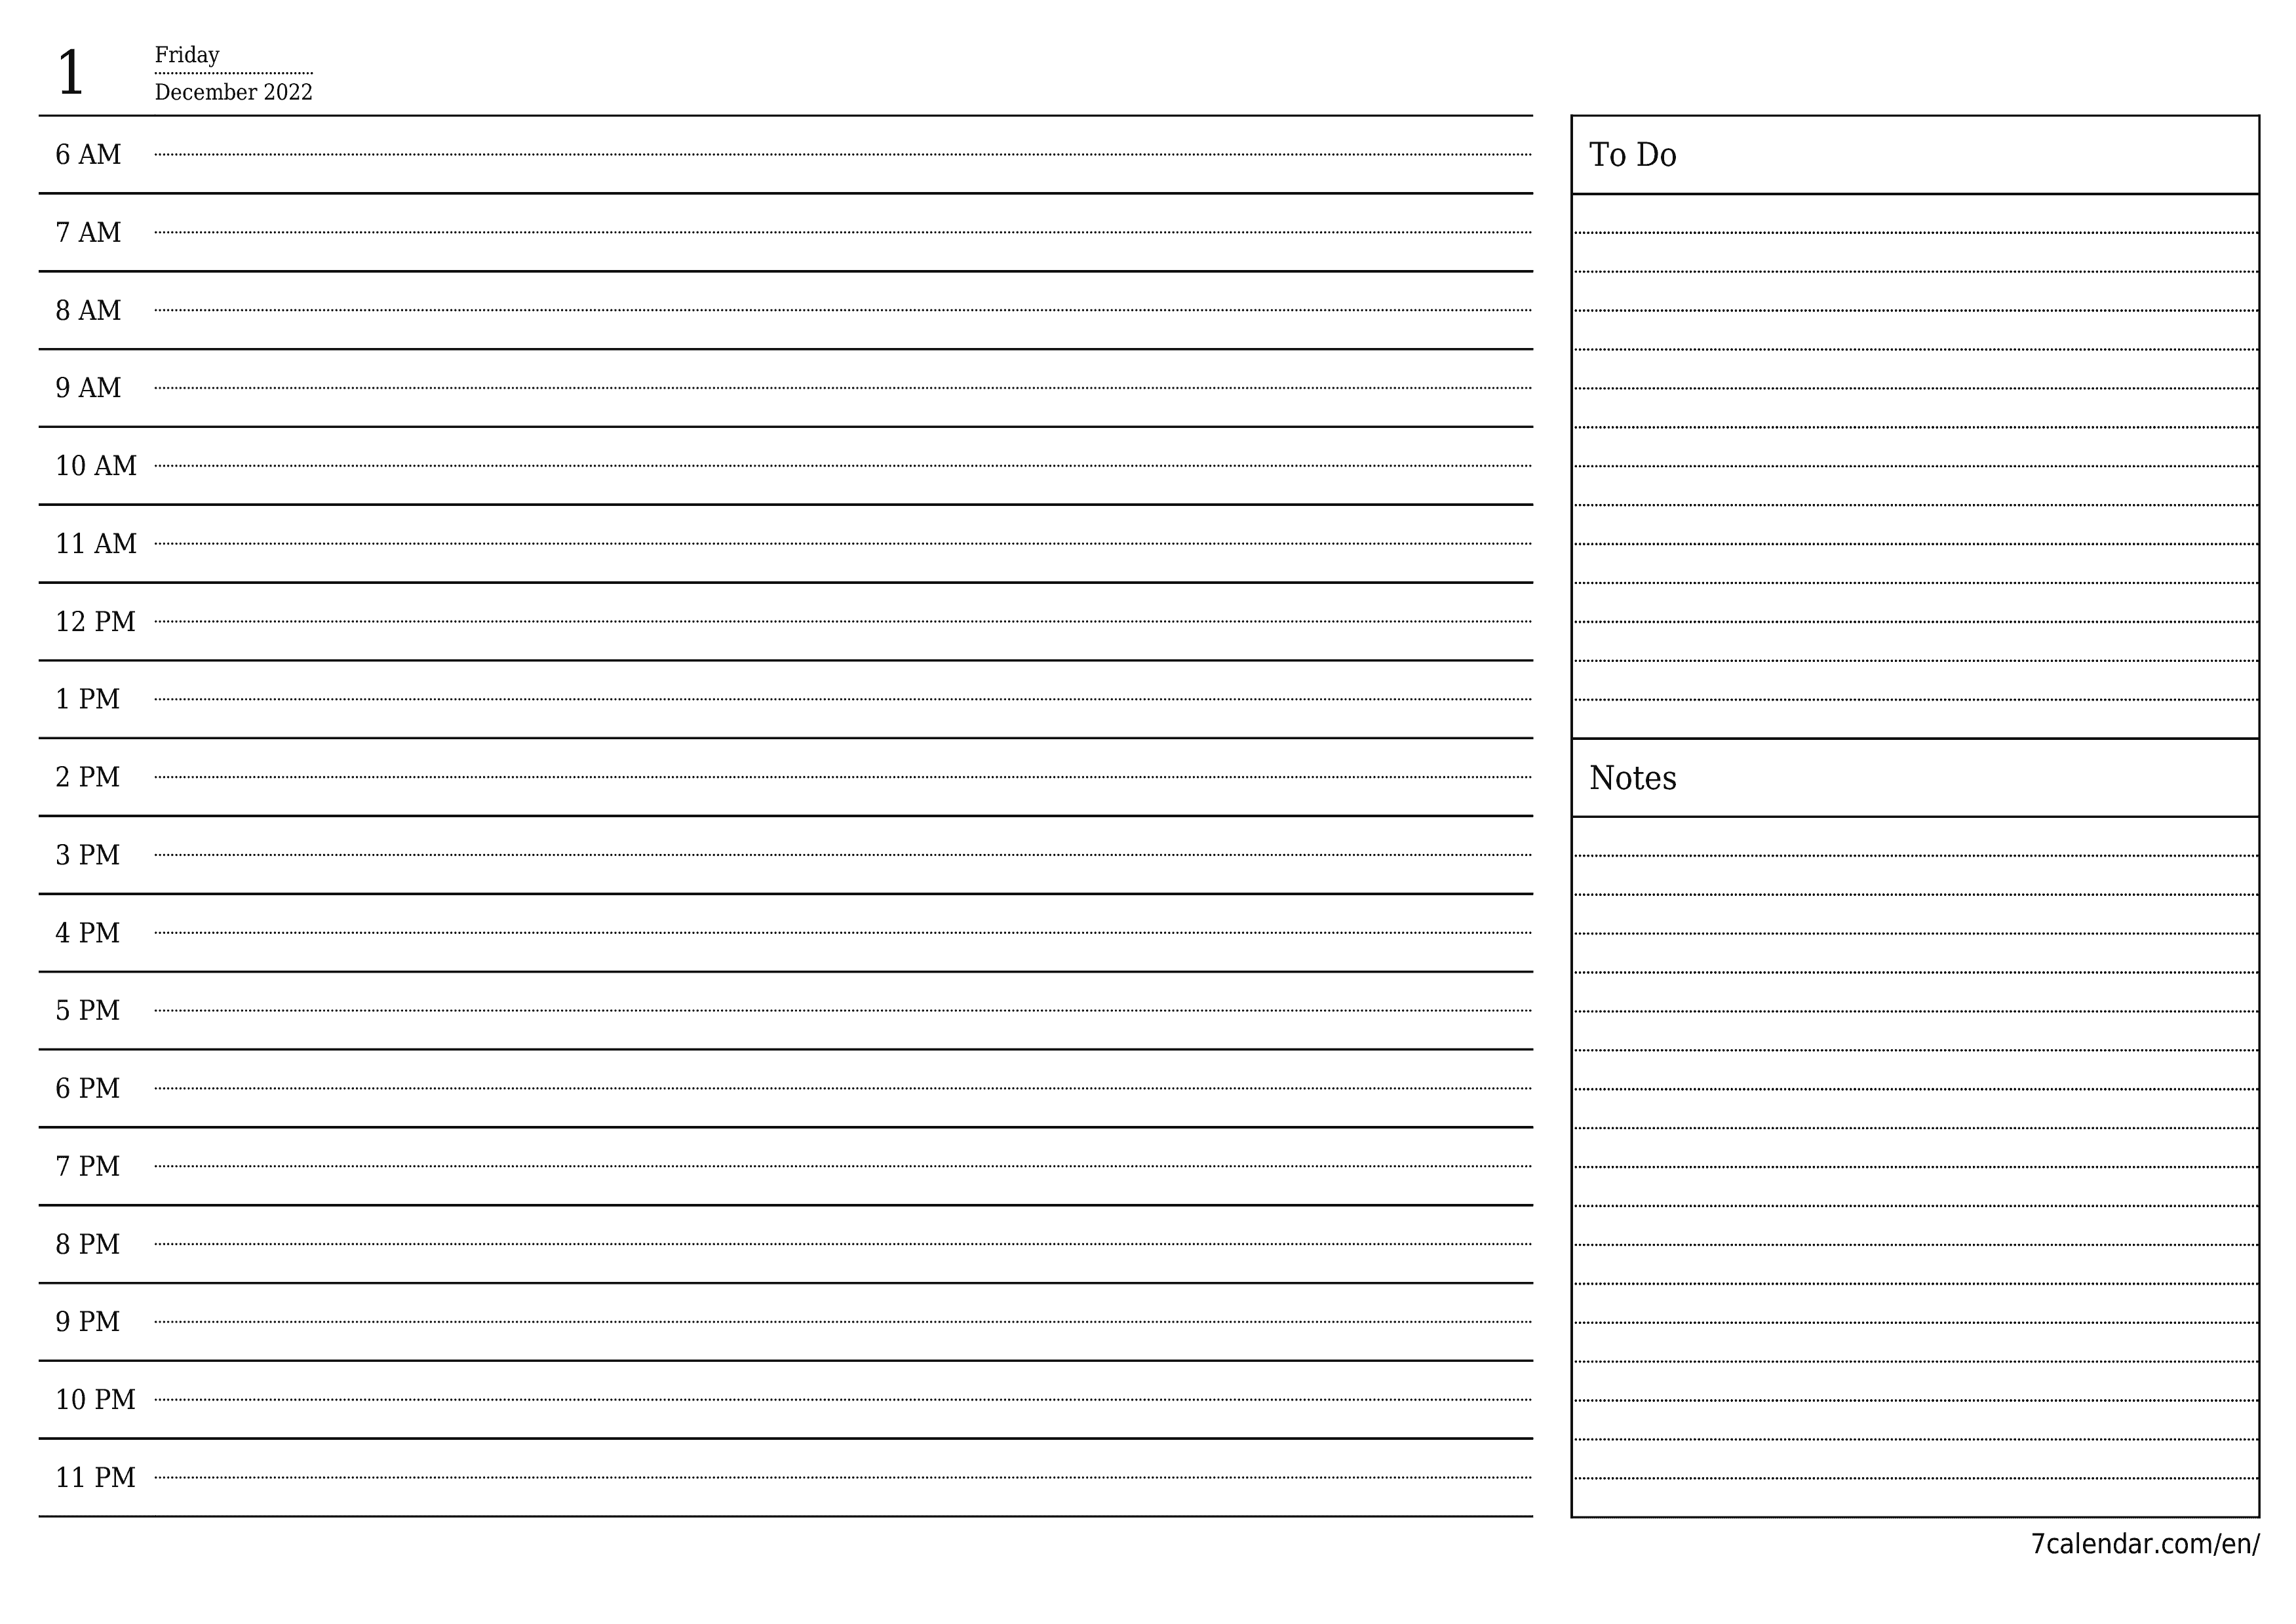 Blank daily printable calendar and planner for day December 2022 with notes, save and print to PDF PNG English - 7calendar.com